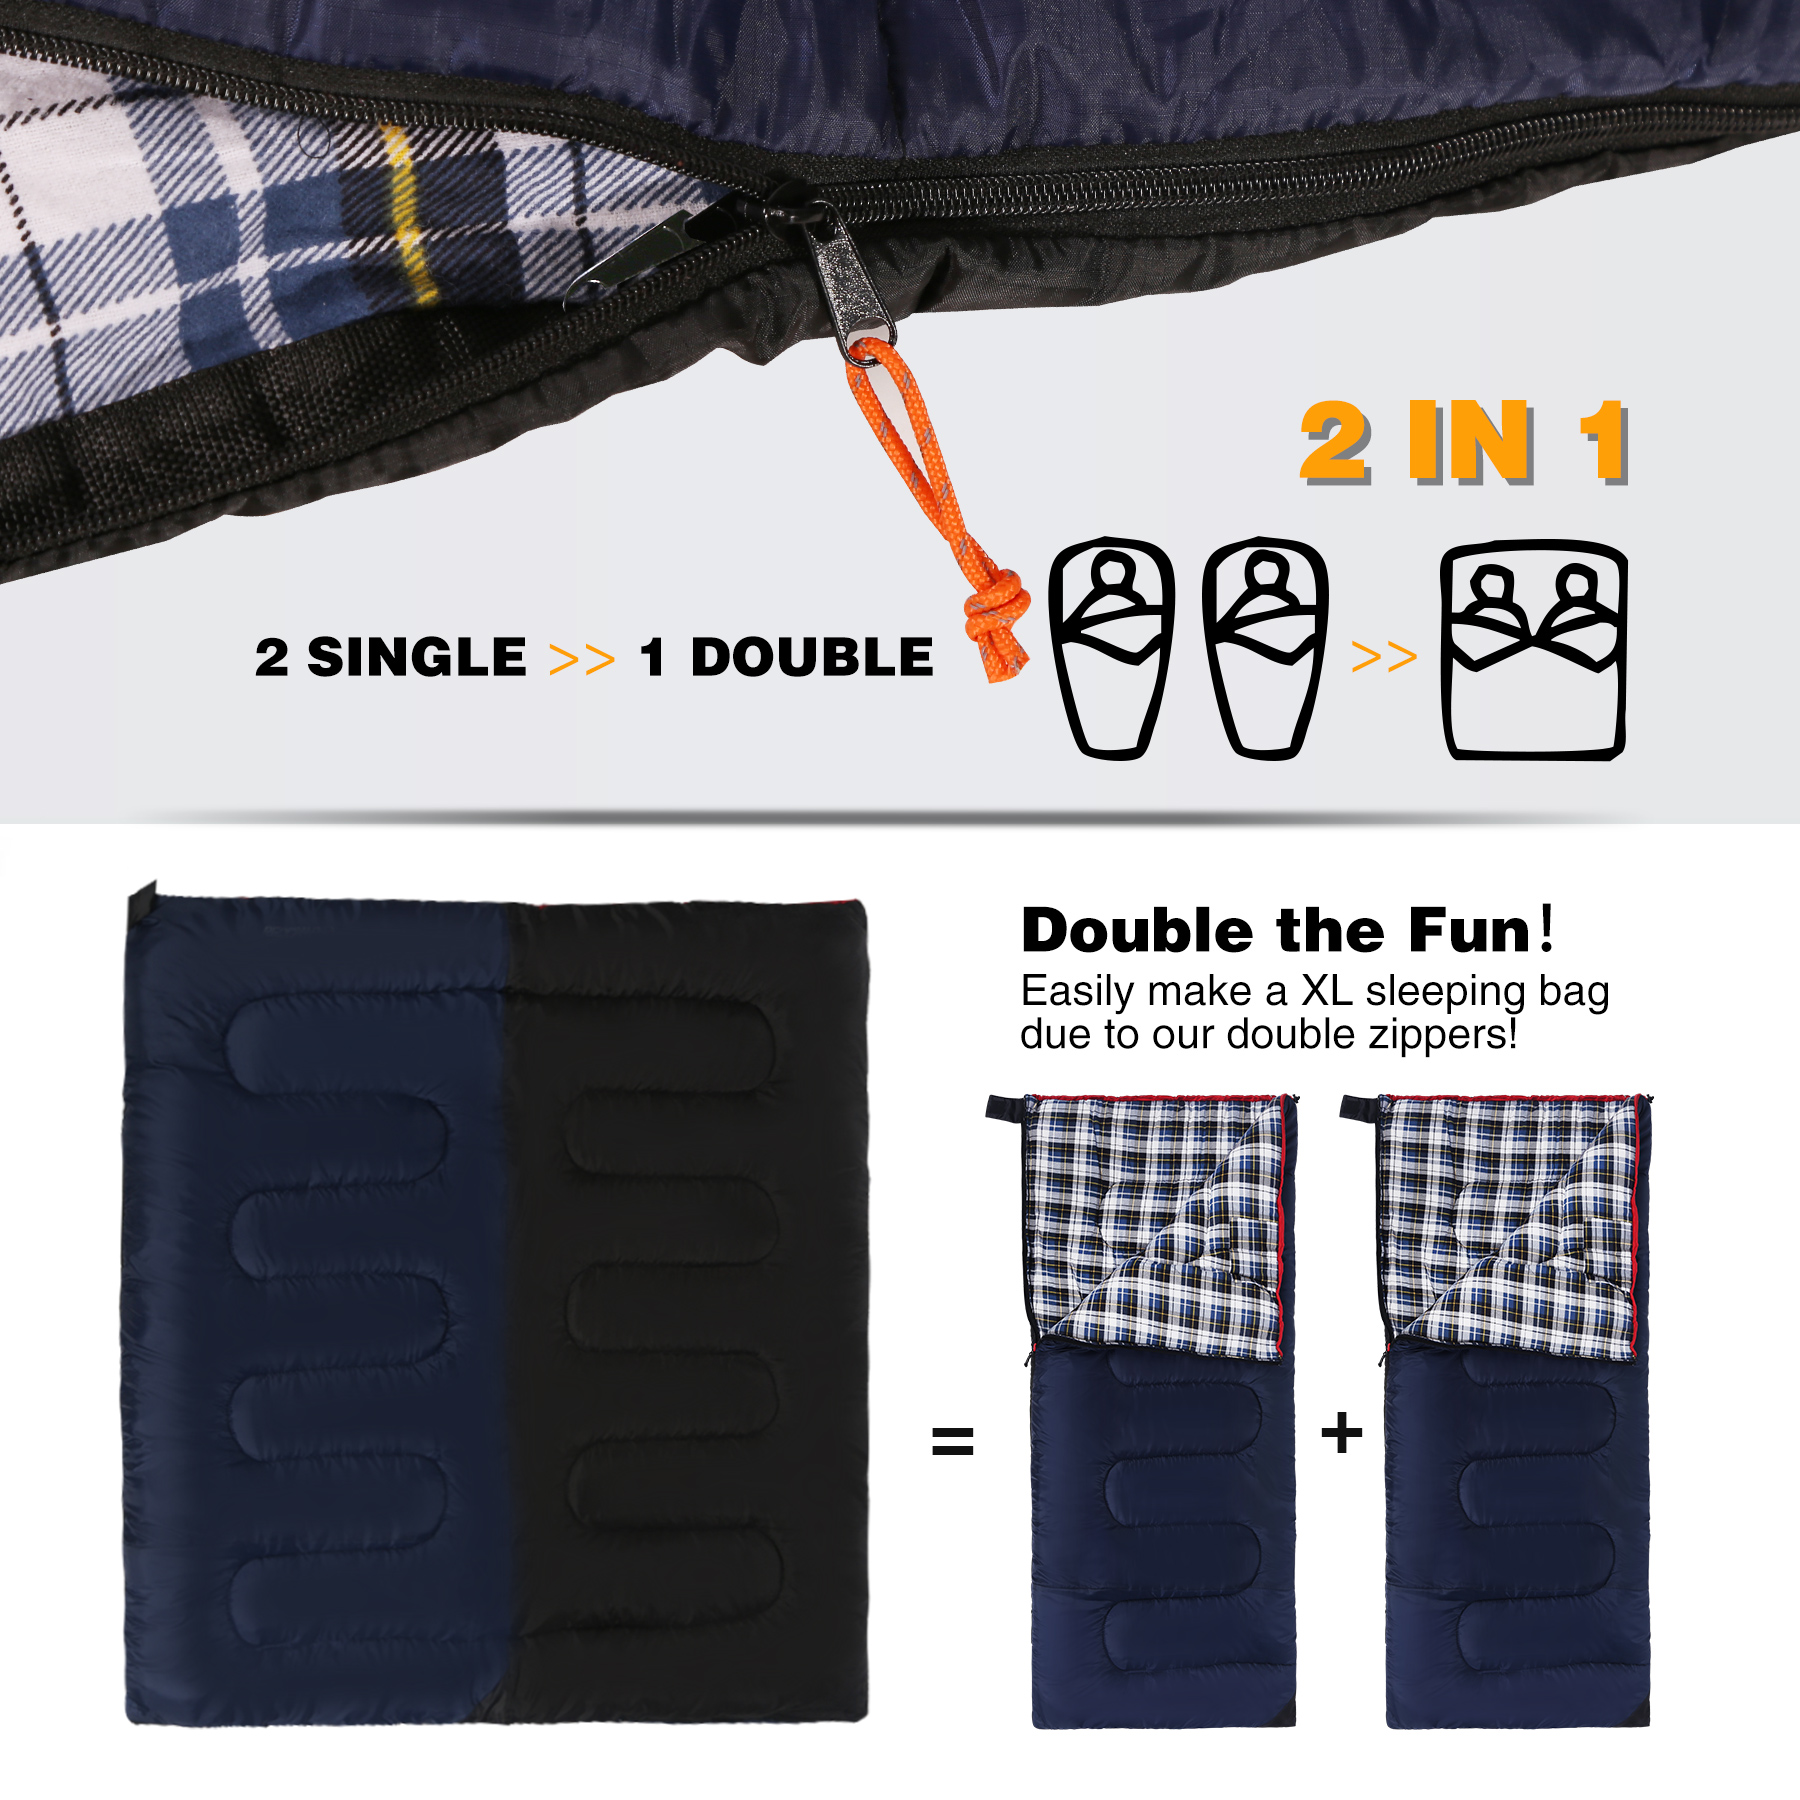 REDCAMP Cotton Flannel Sleeping Bags for Adults Warm/Cold Weather, 4 Season Waterproof Portable Sleep Bag for Camping w/ Compression Sack, Blue - image 2 of 8